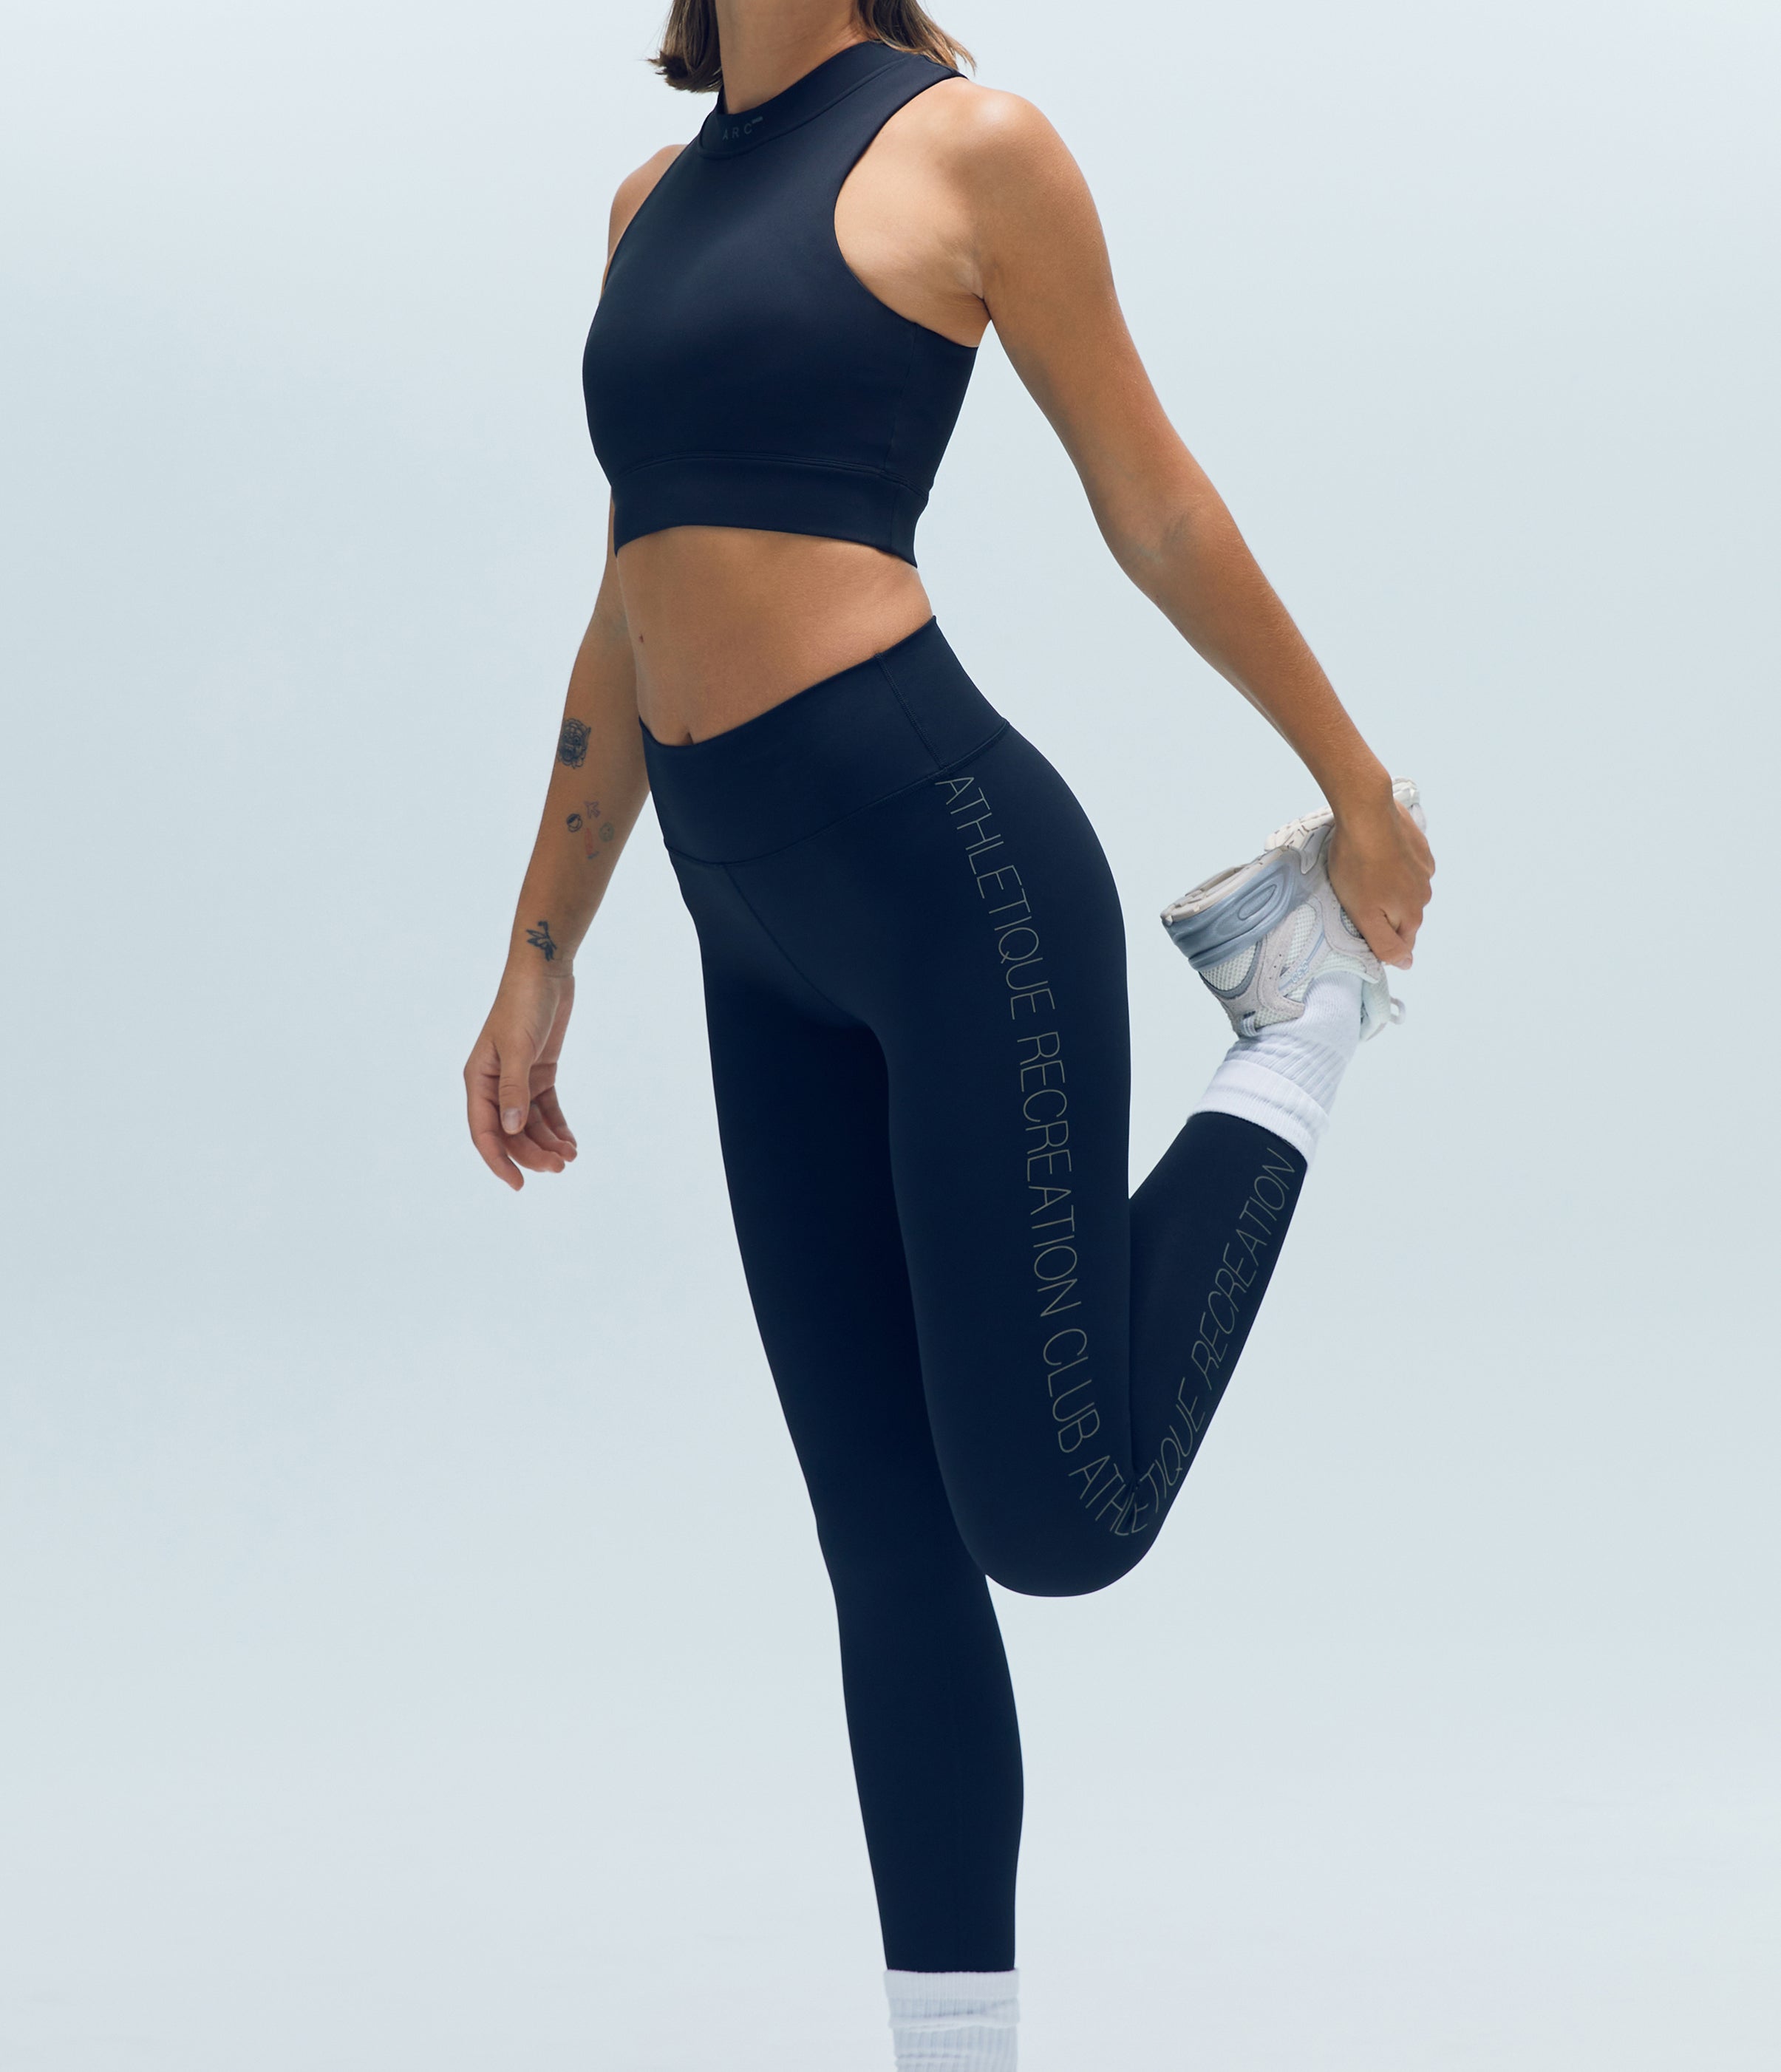 Active Core Tights